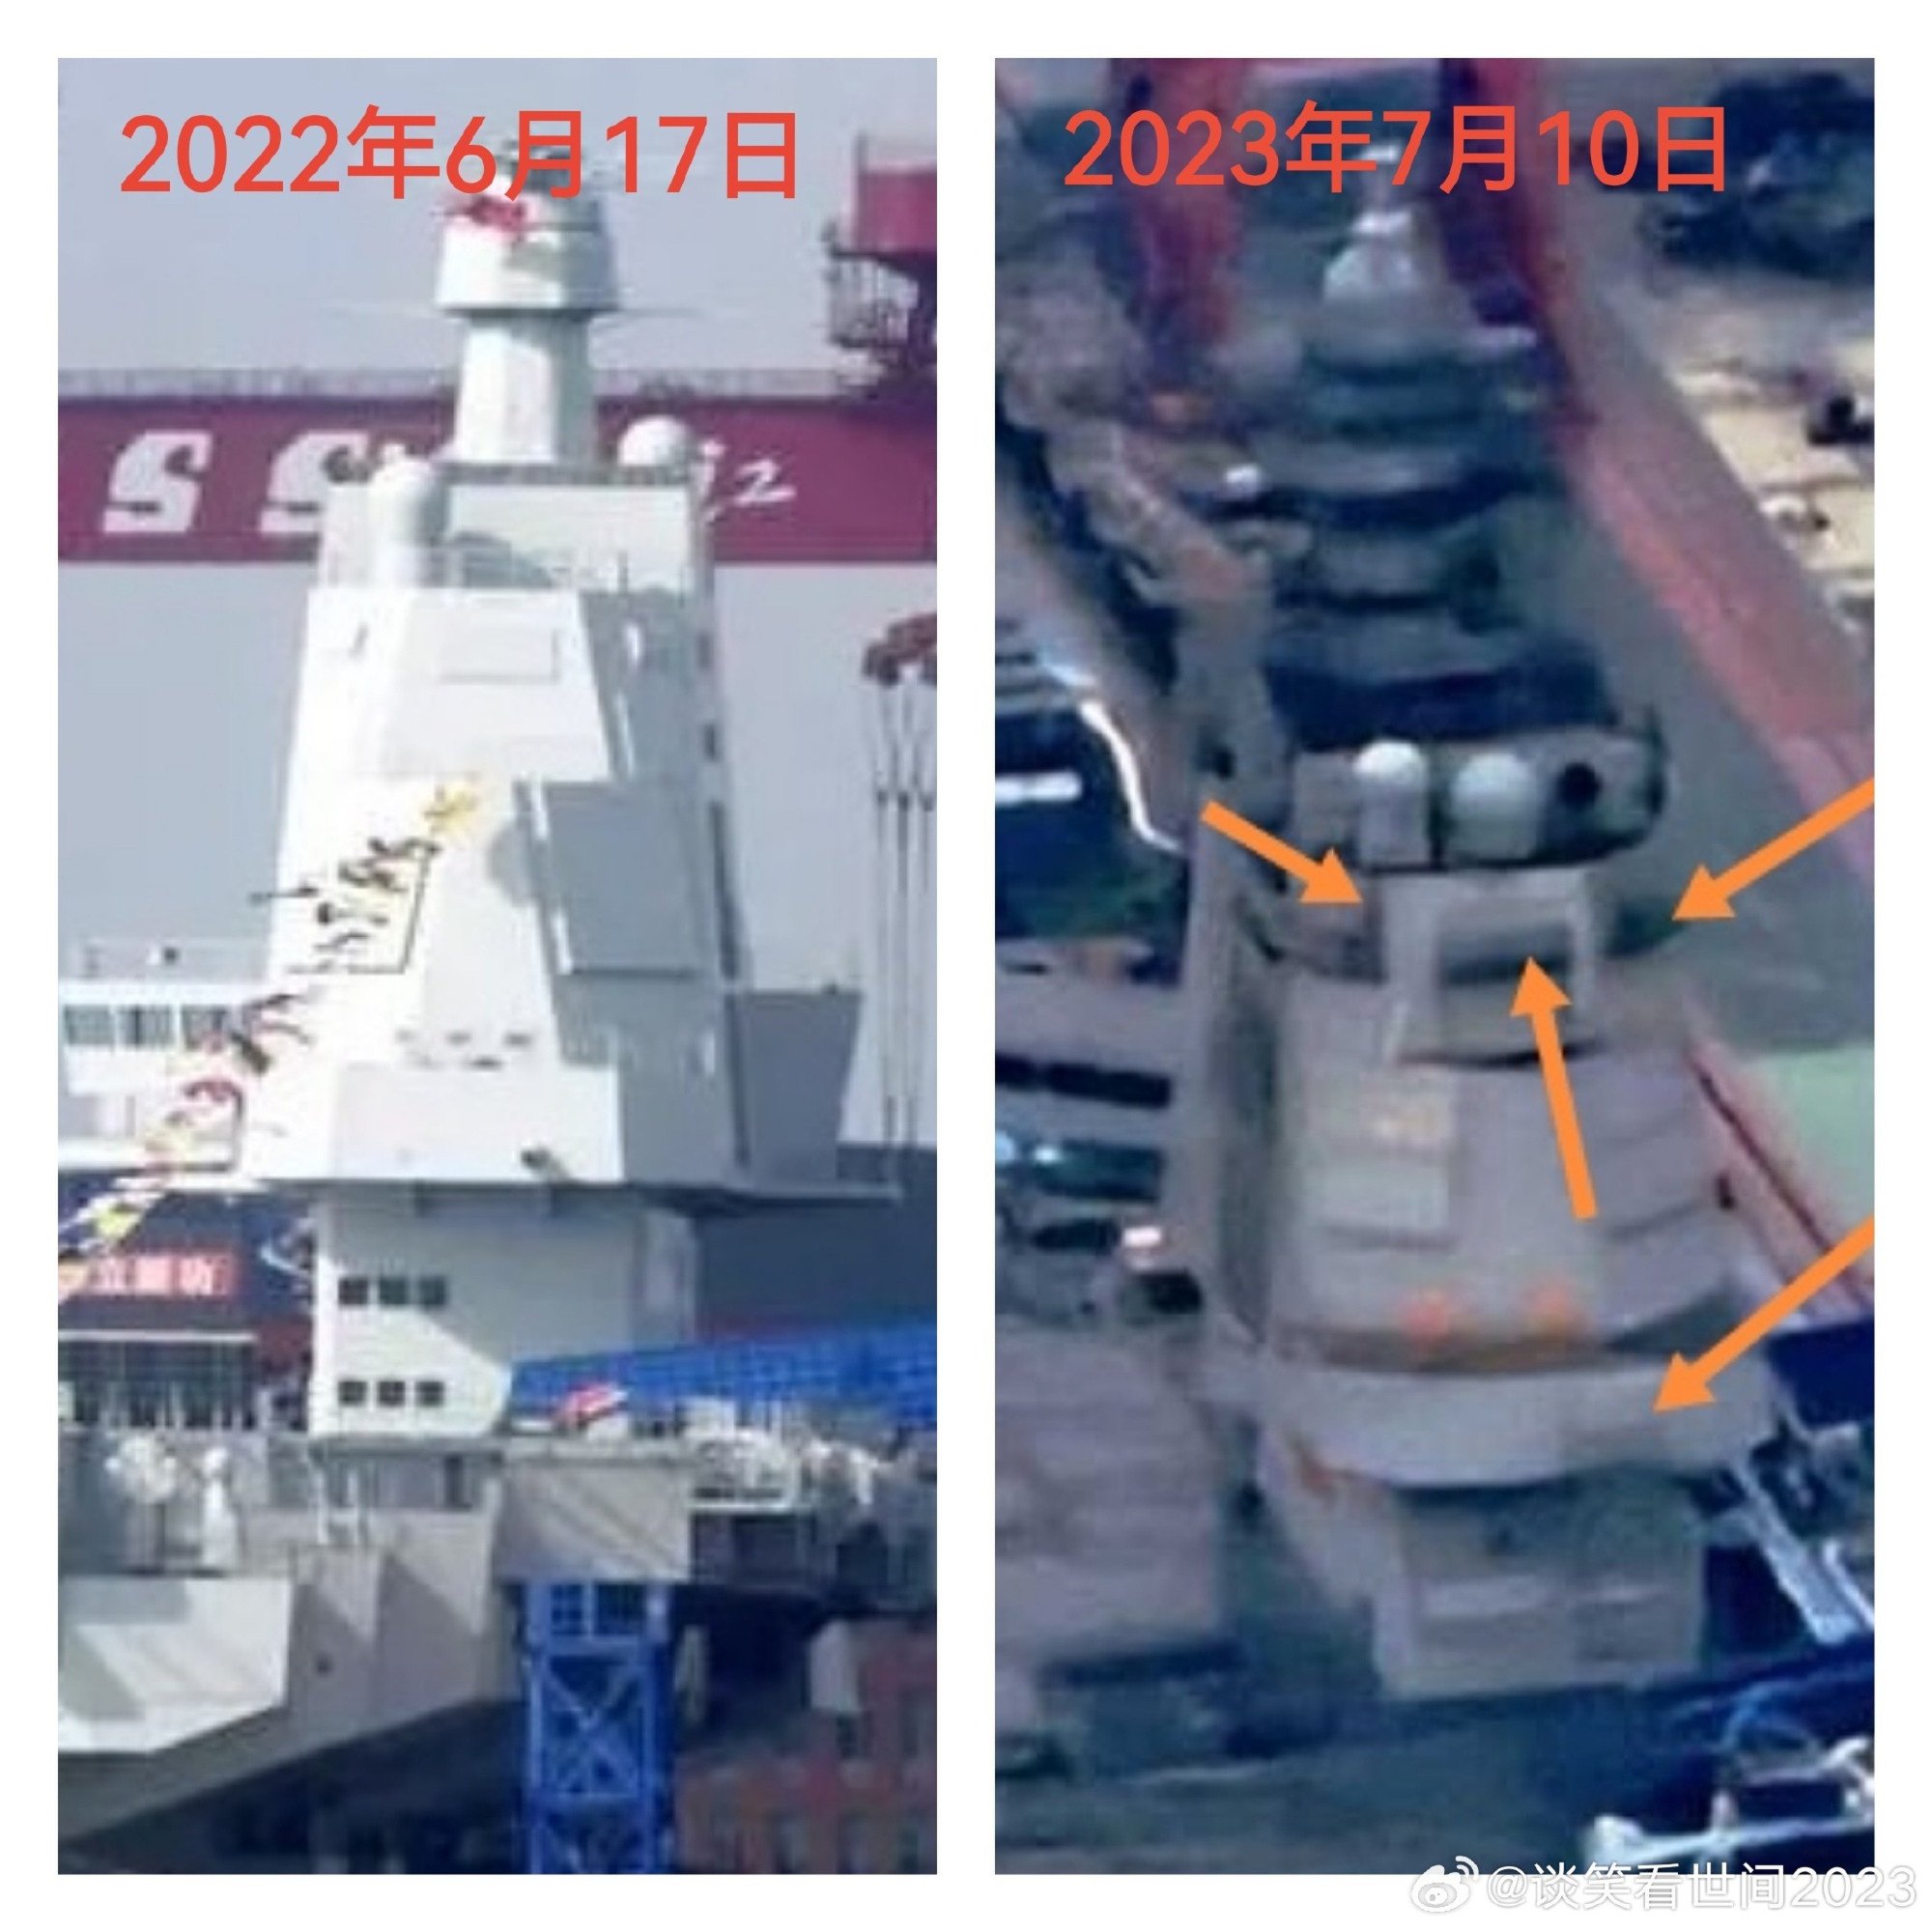 Radars did not appear to be installed in the control tower island (left) when the Fujian was launched on June 17, 2022, but the most recent photo (right) shows the fit-out is almost complete. Photo: Weibo